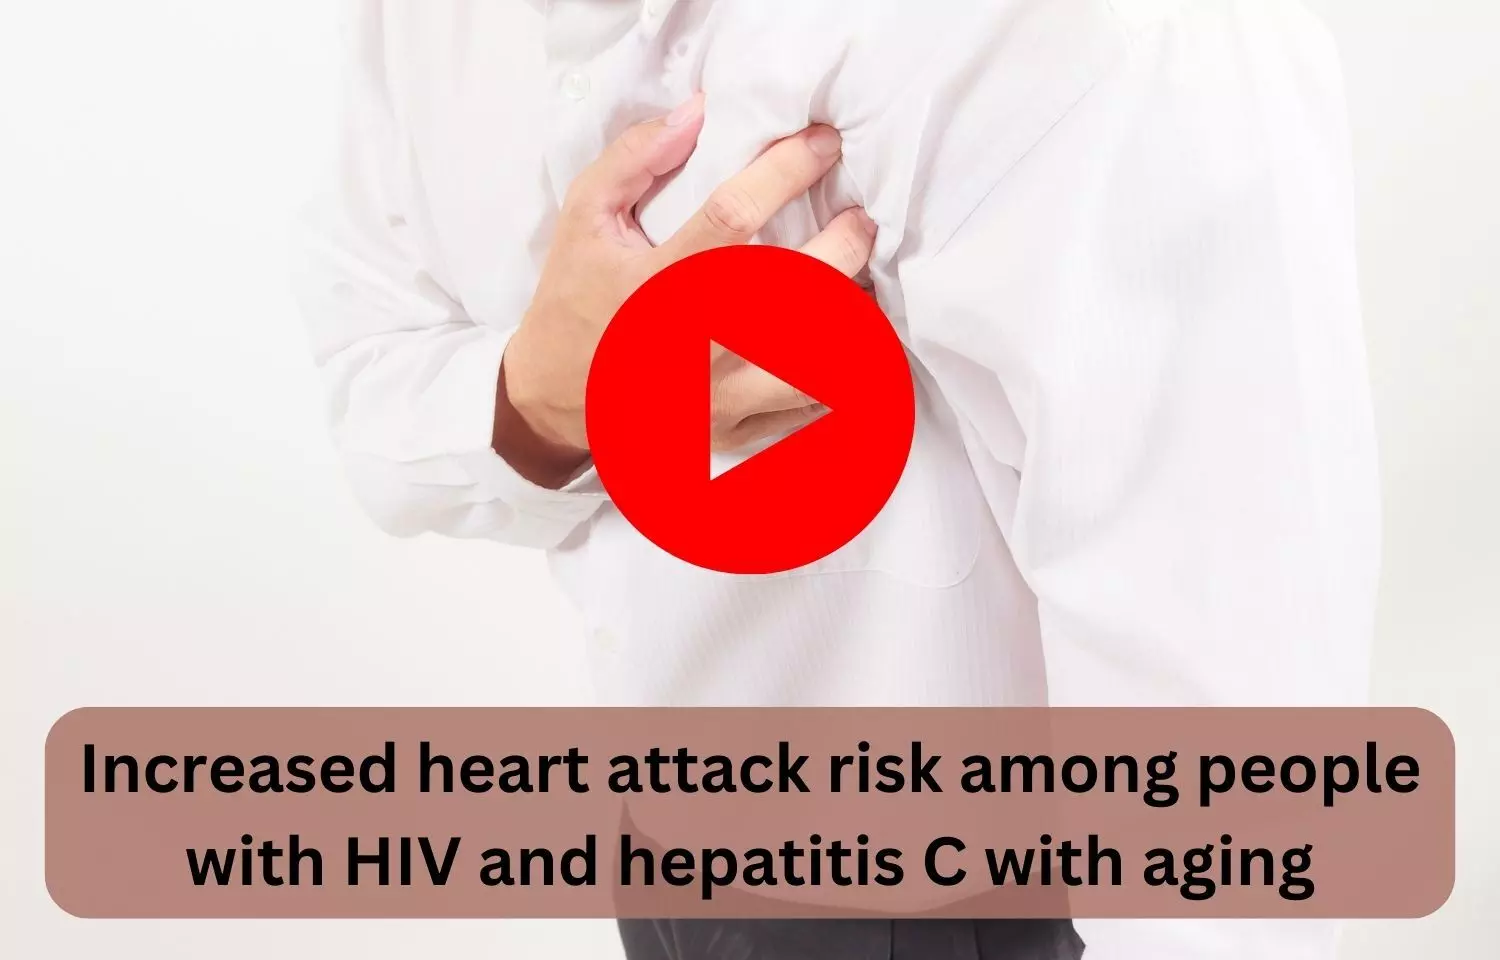 Increased heart attack risk among people with HIV and hepatitis C with aging